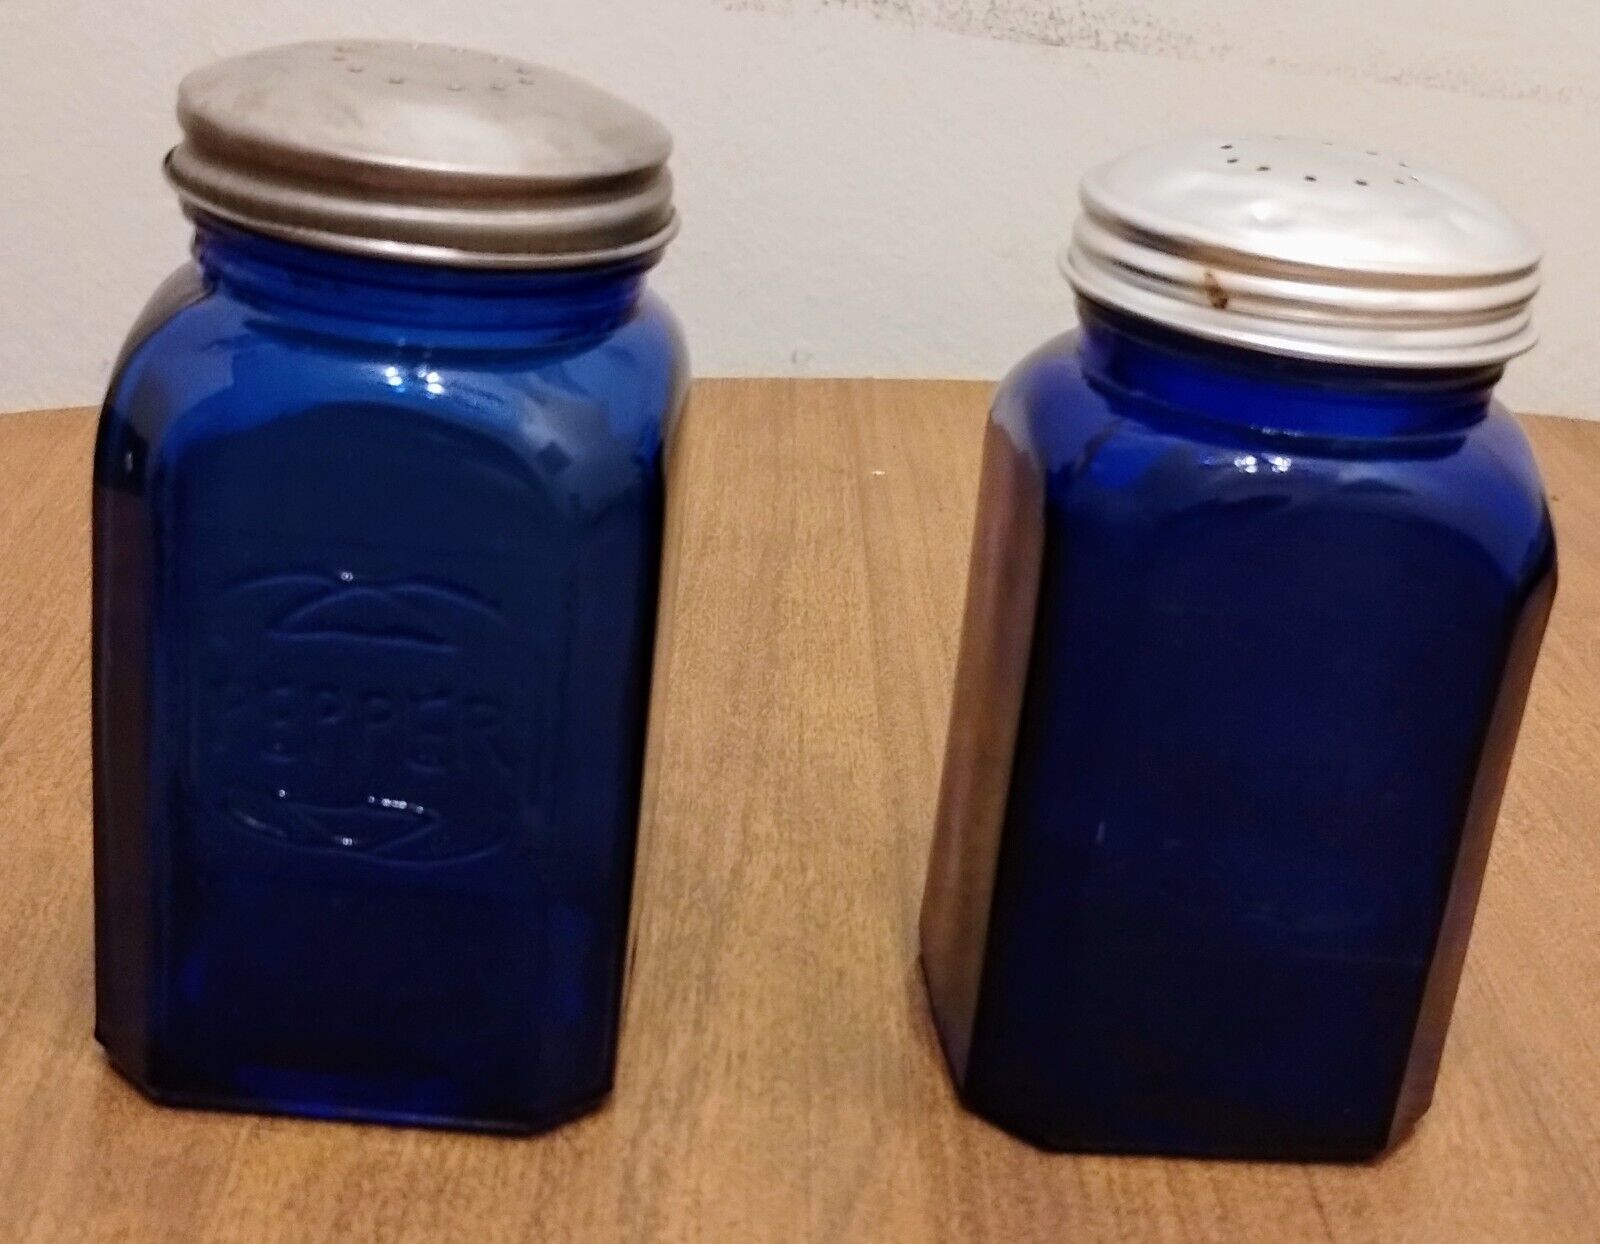 COBALT BLUE GLASS PEPPER SHAKERS Etched Design Lot Of 2